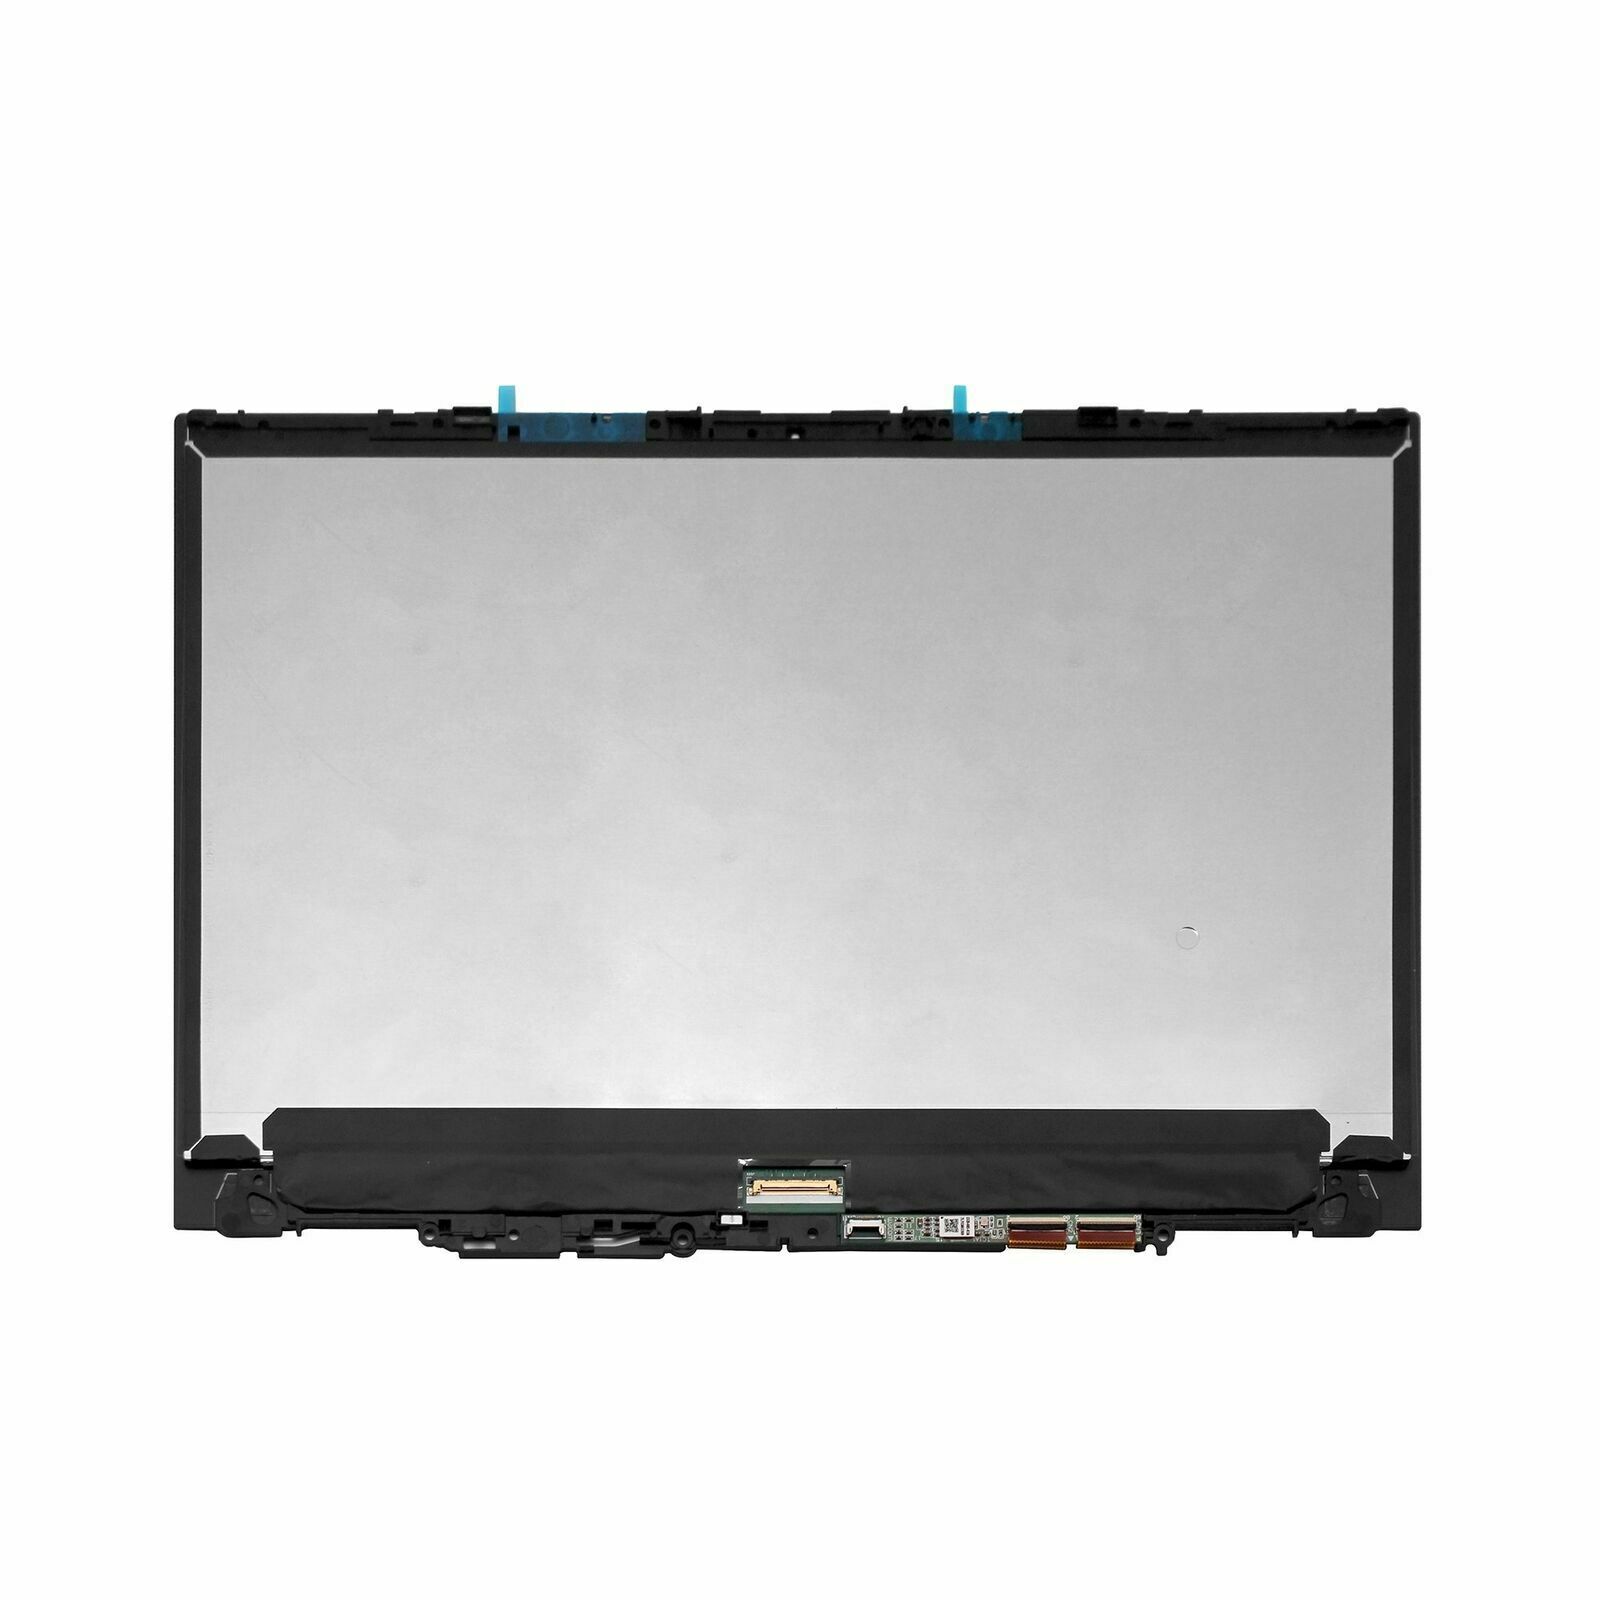 Lenovo Yoga 720-12ikb 81B FHD LCD Touch Screen Assembly with Bezel -  caprictech : e-Shop for Laptop, Pcs, Phones, Tablets & Parts